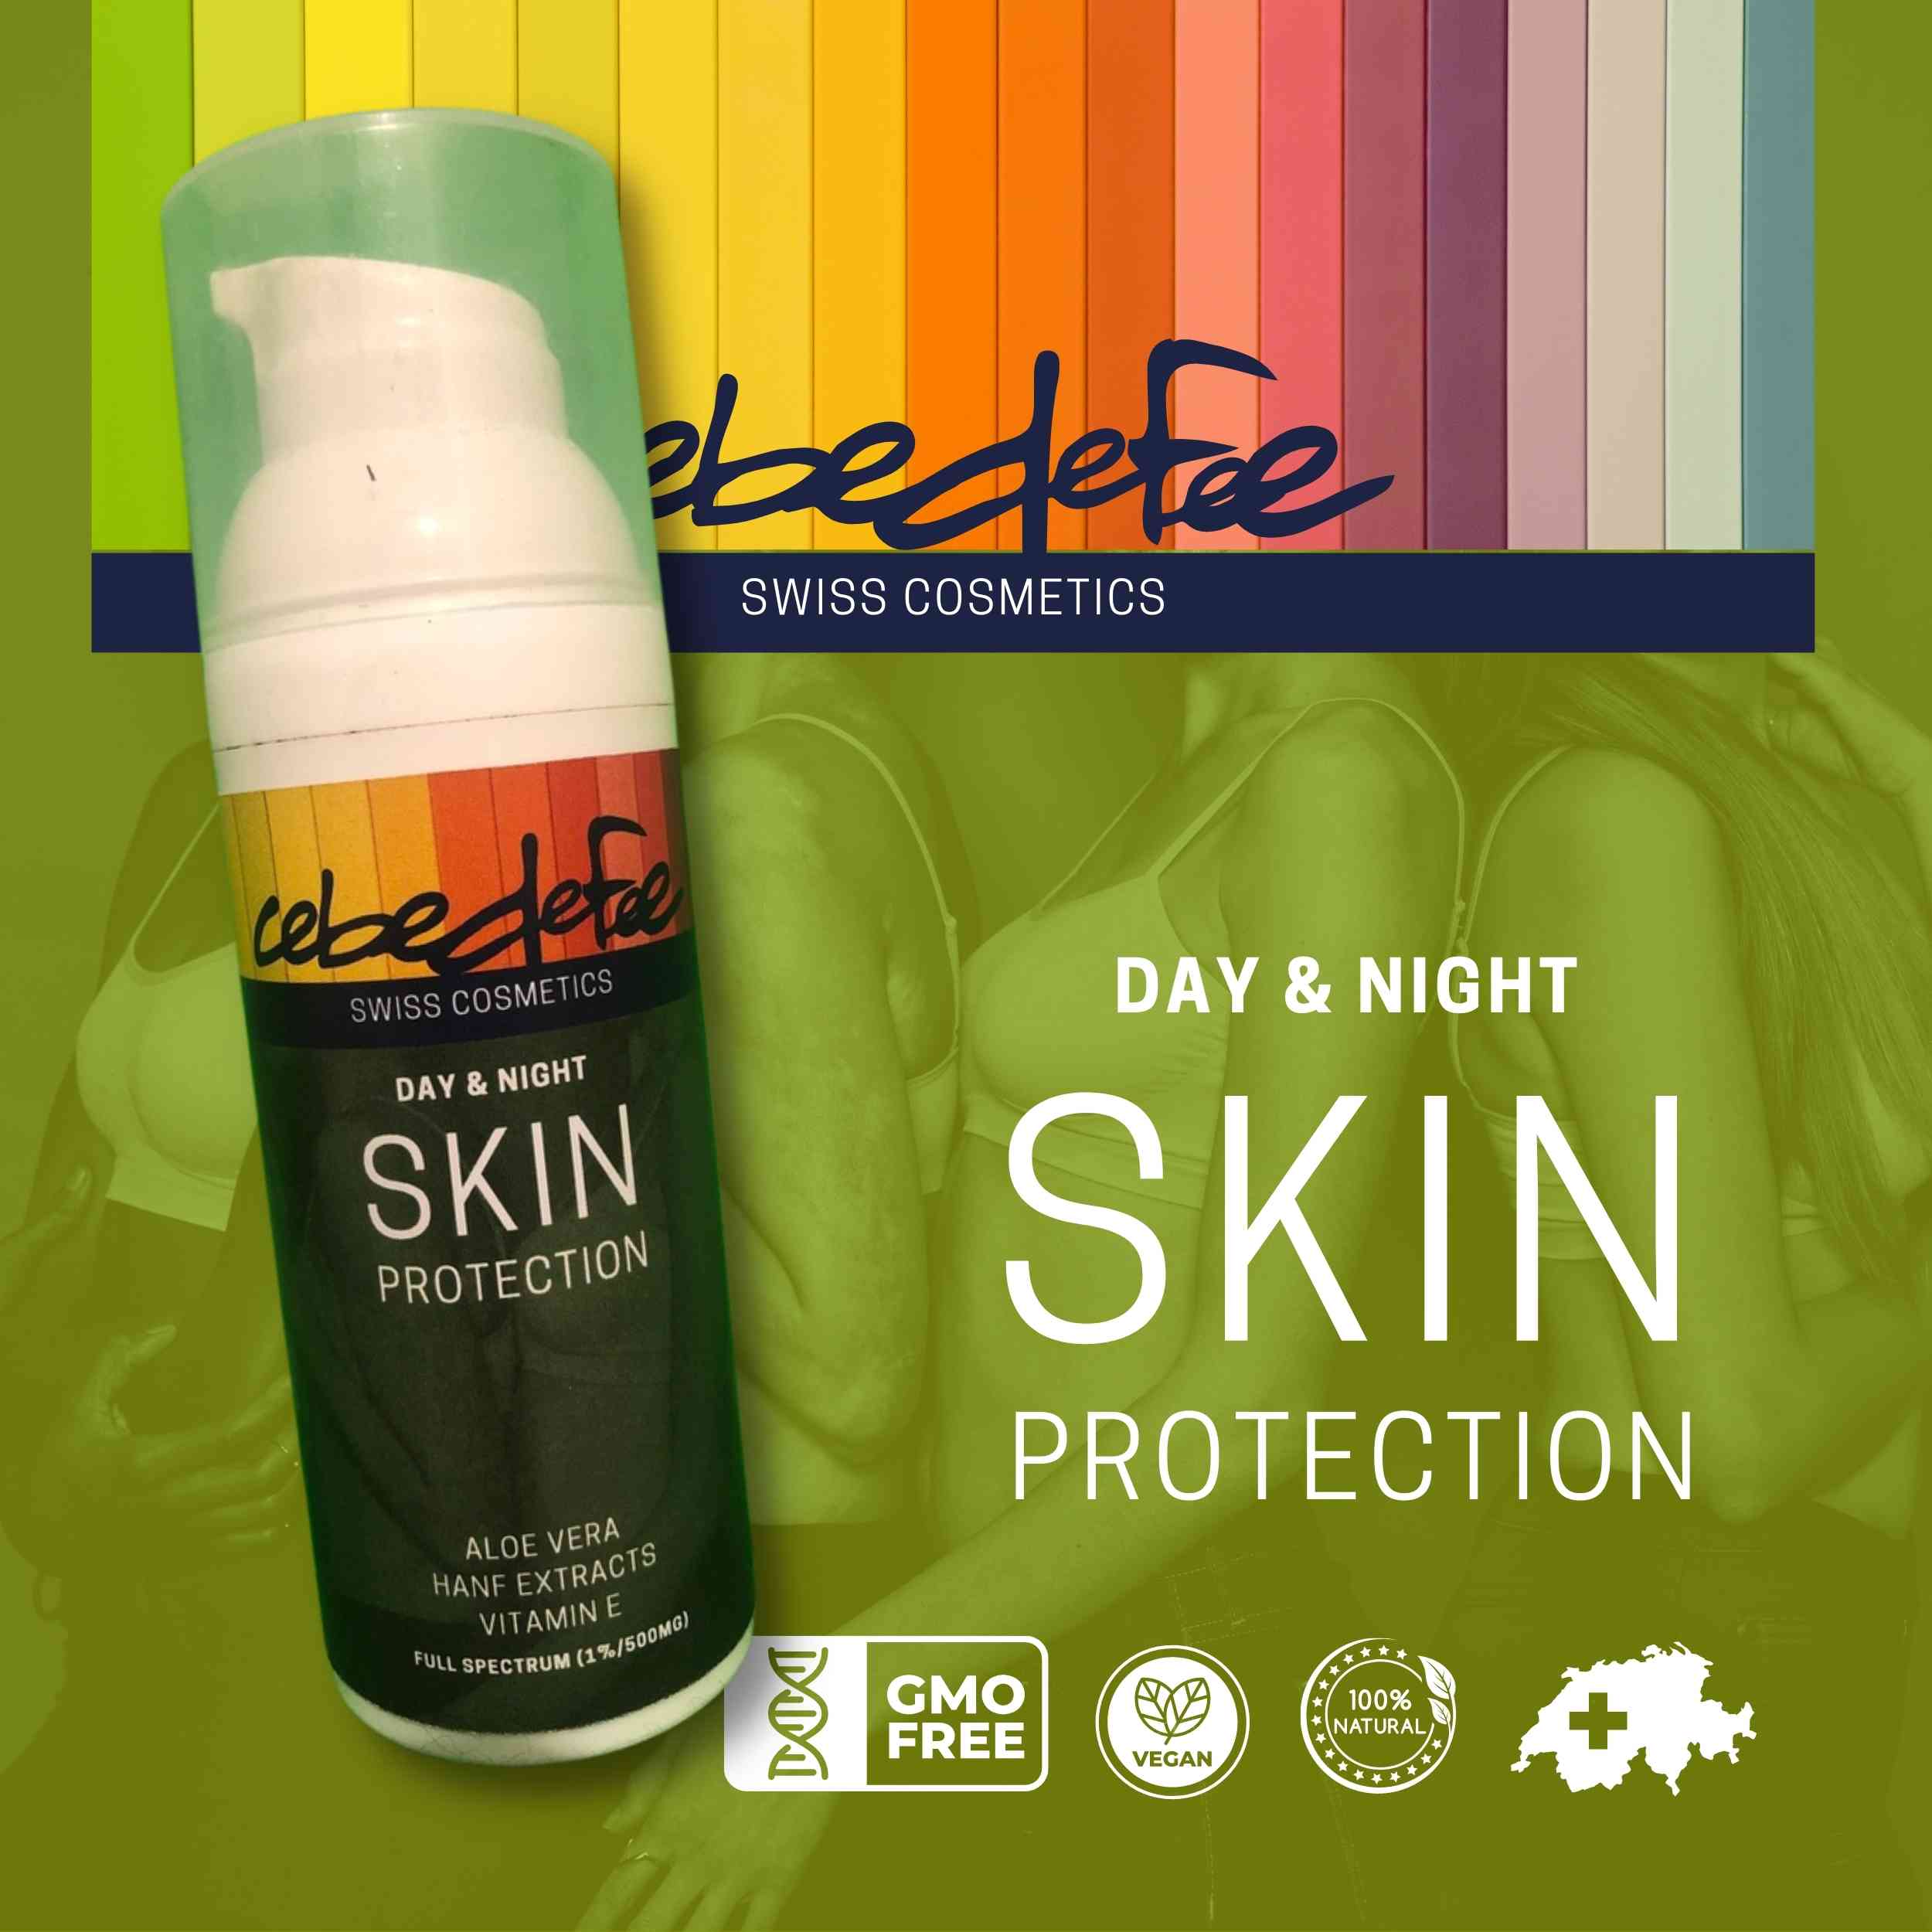 cebedefee DAY AND NIGHT SKIN PROTECTION - 50 ml Flasche